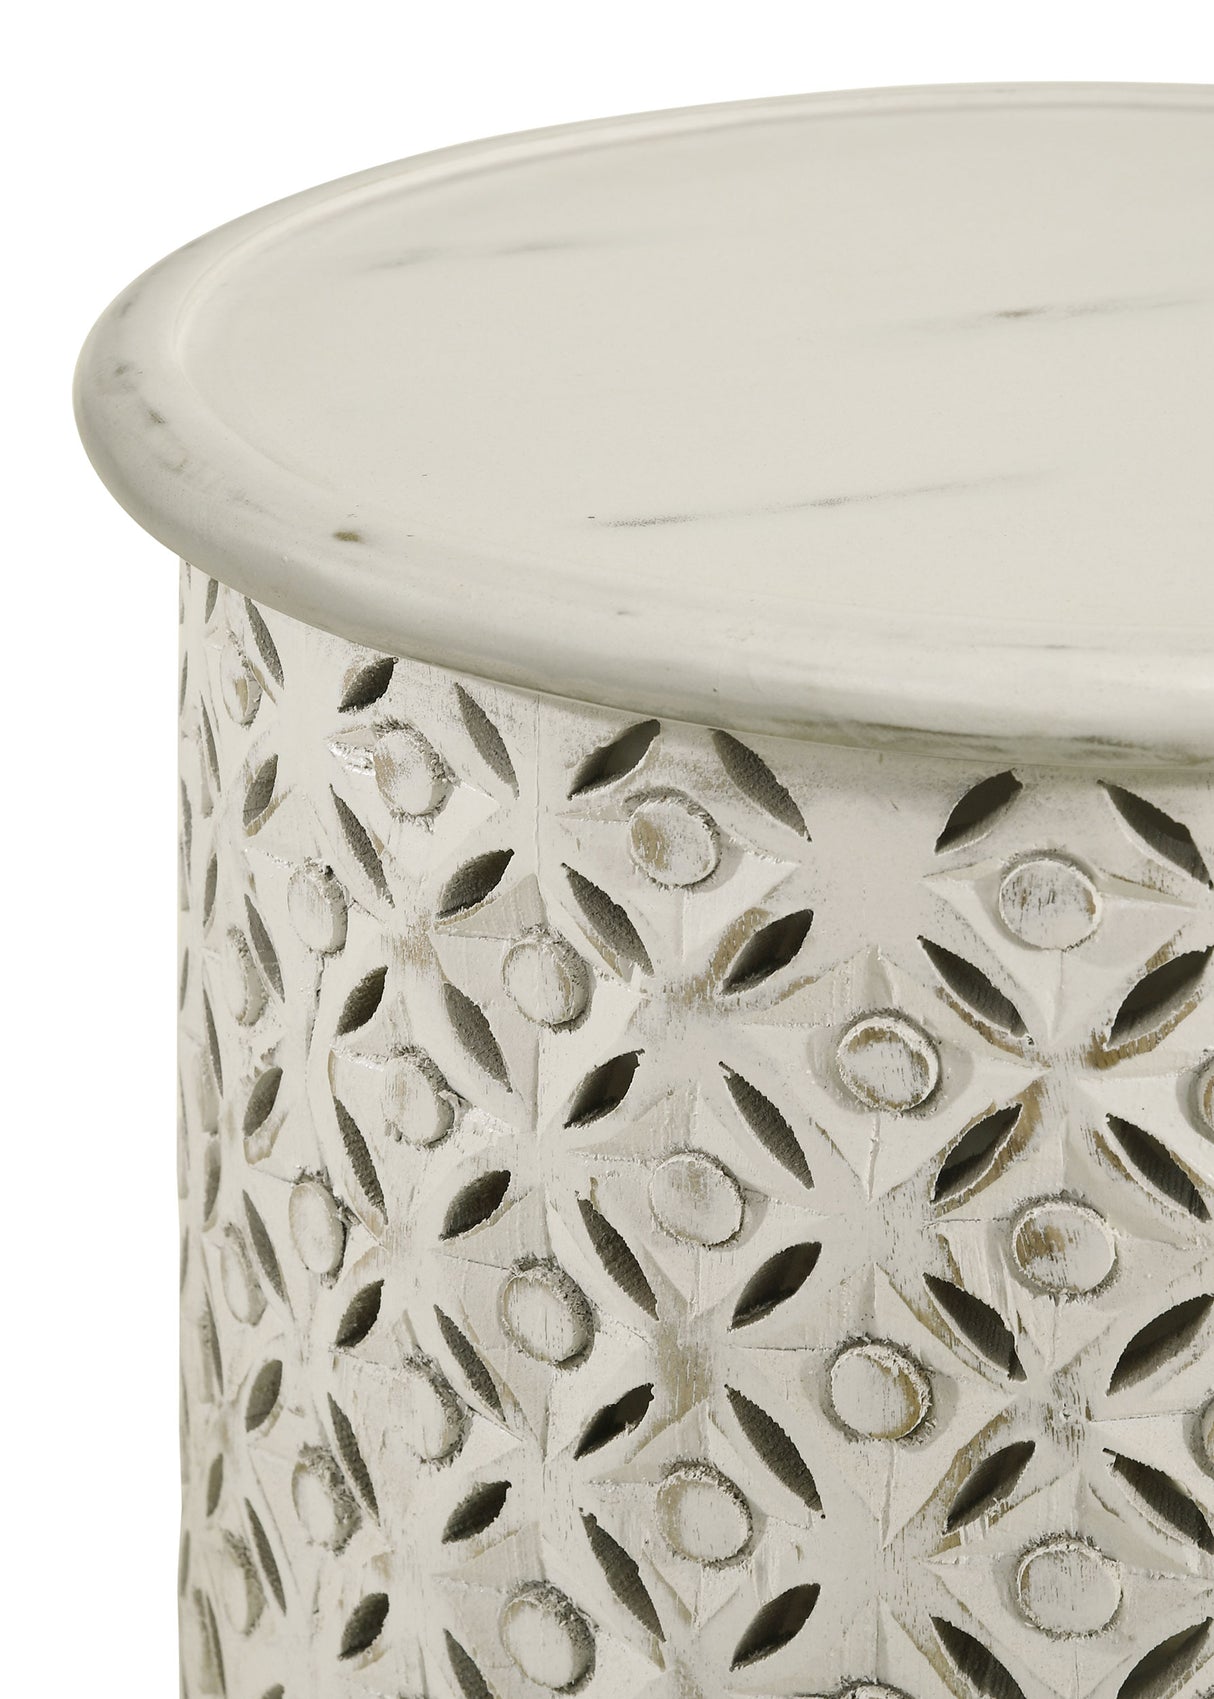 Side Table - Krish 18-inch Round Accent Table White Washed